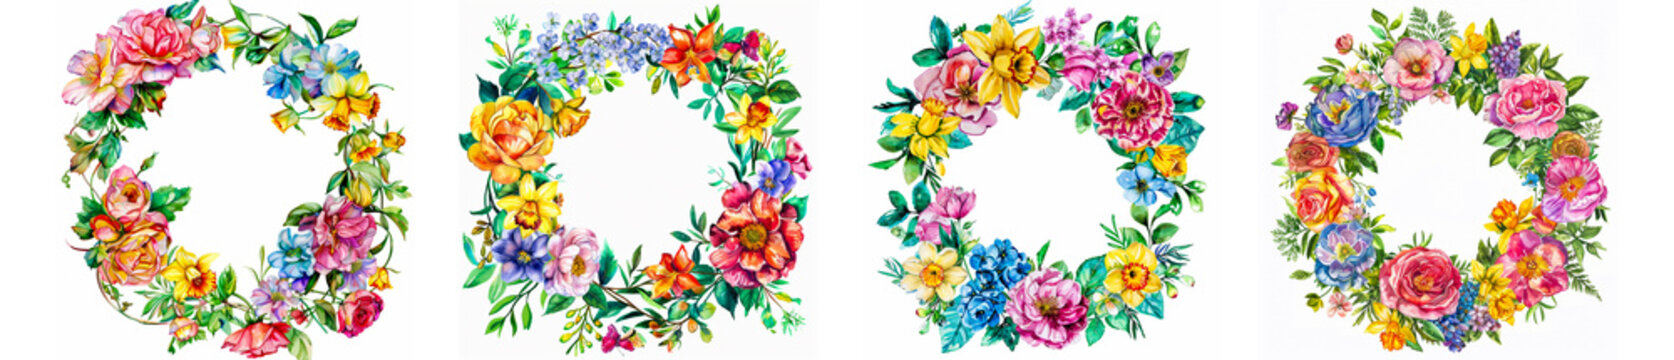 watercolor illustration clipart of a cheerful floral wreath.